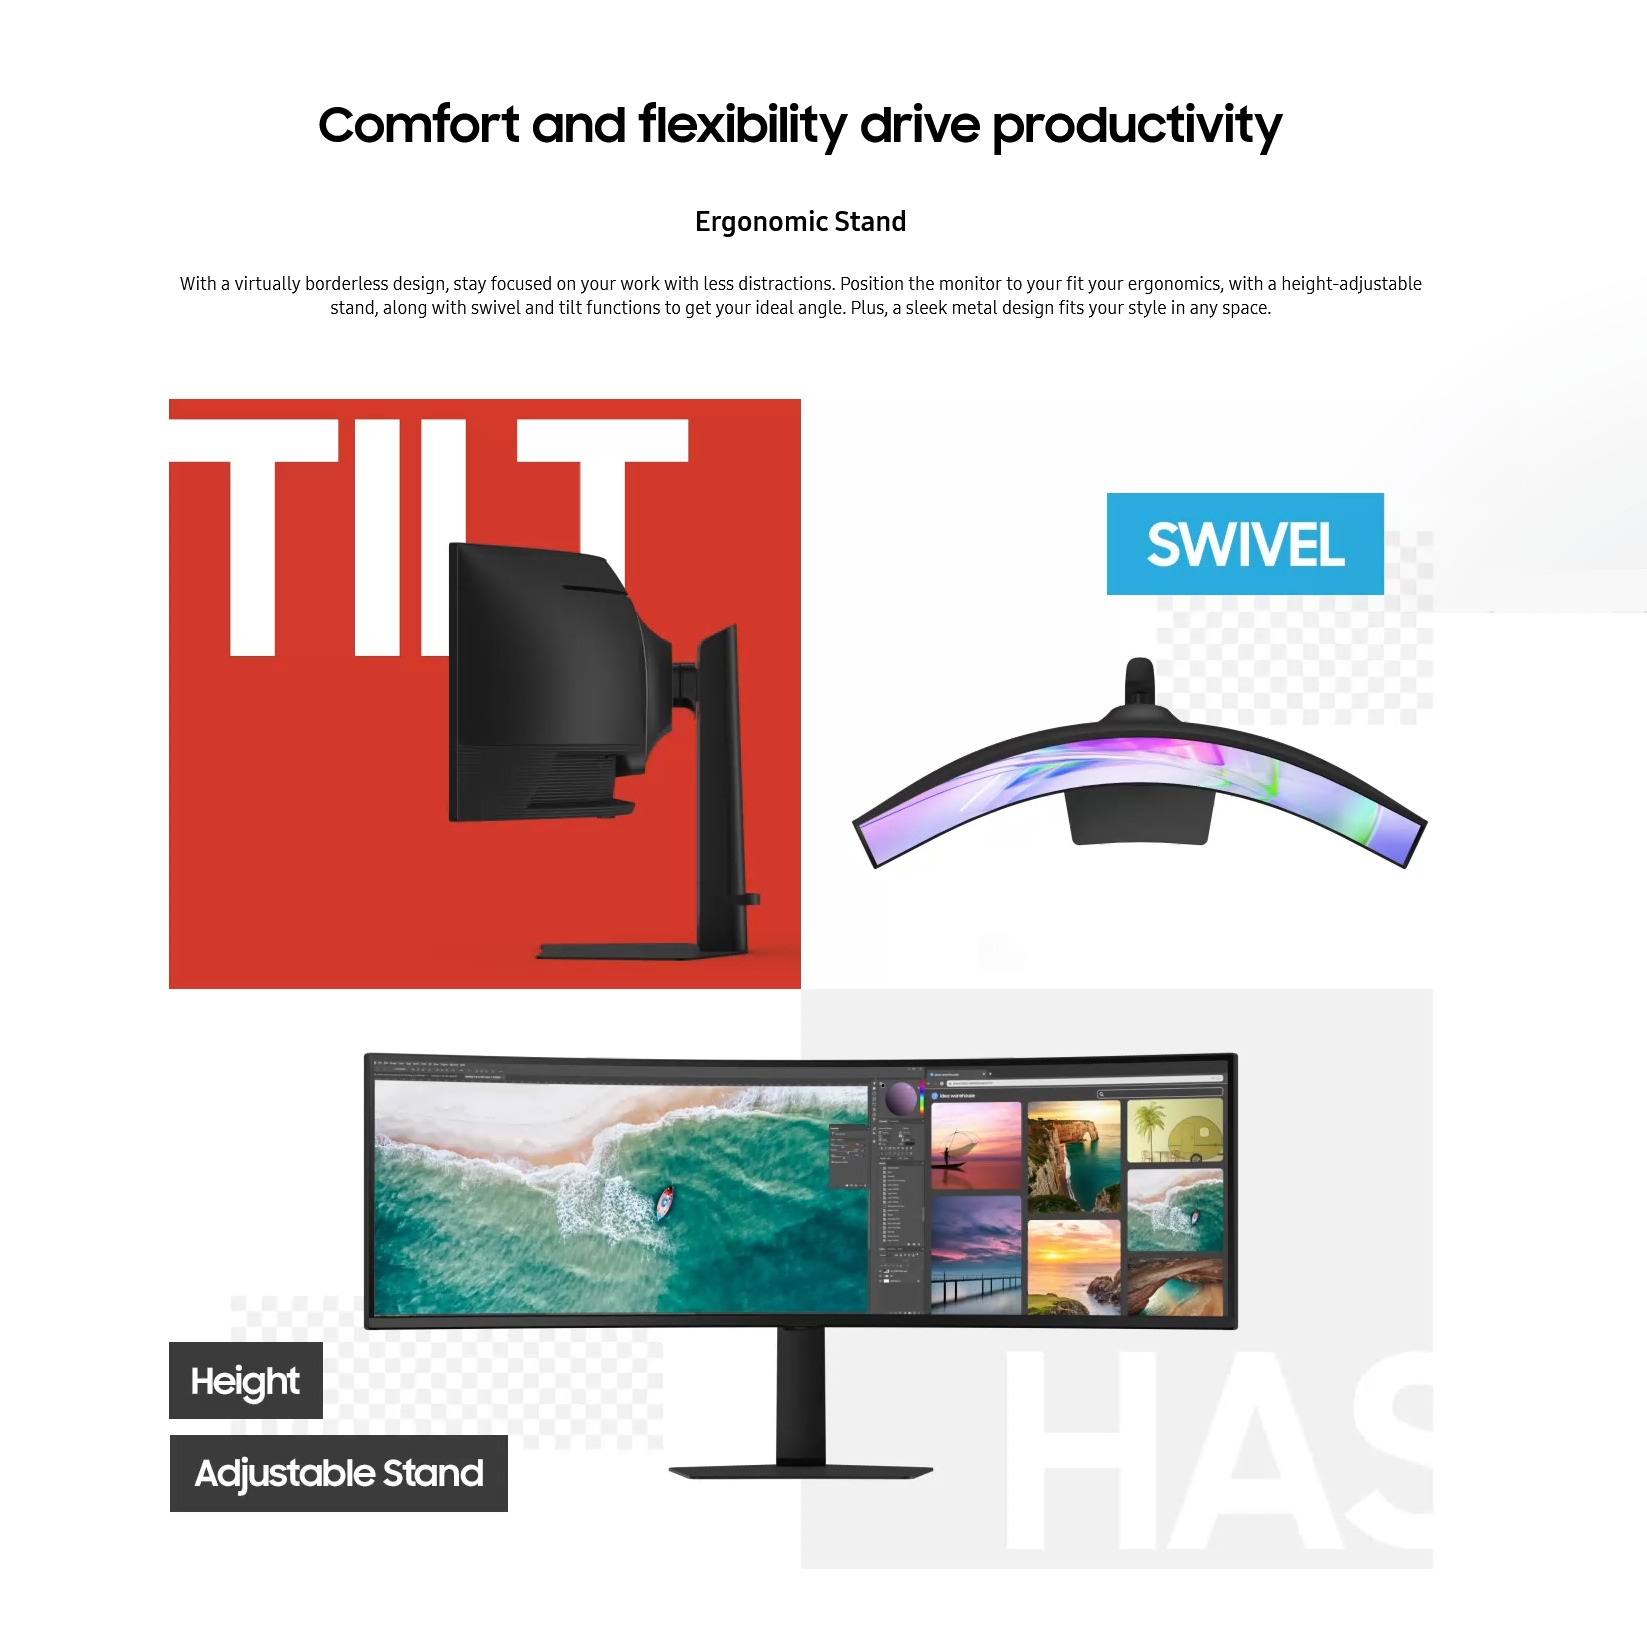 A large marketing image providing additional information about the product Samsung ViewFinity S95UC 49" Curved DQHD Ultrawide 120Hz Monitor - Additional alt info not provided